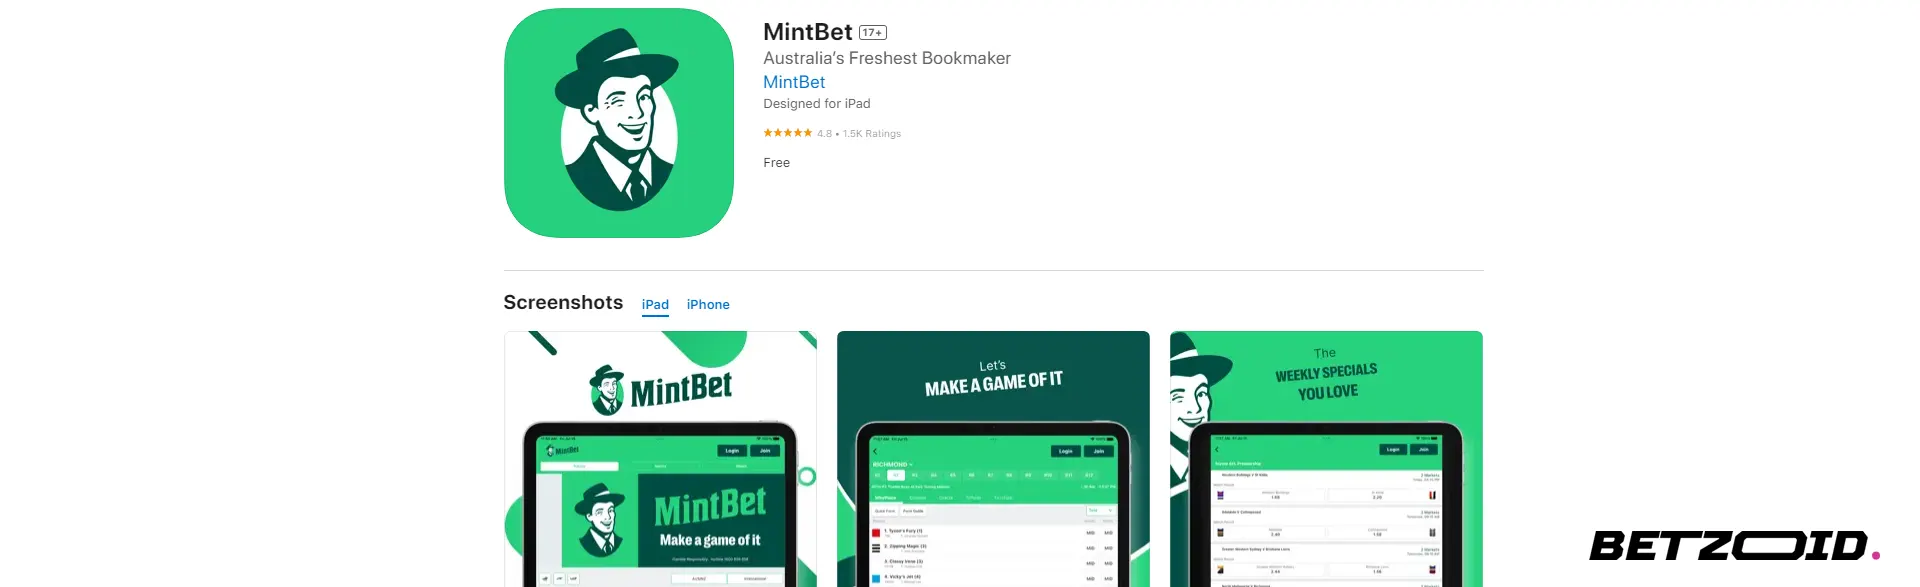 Page for downloading Mintbet mobile app.